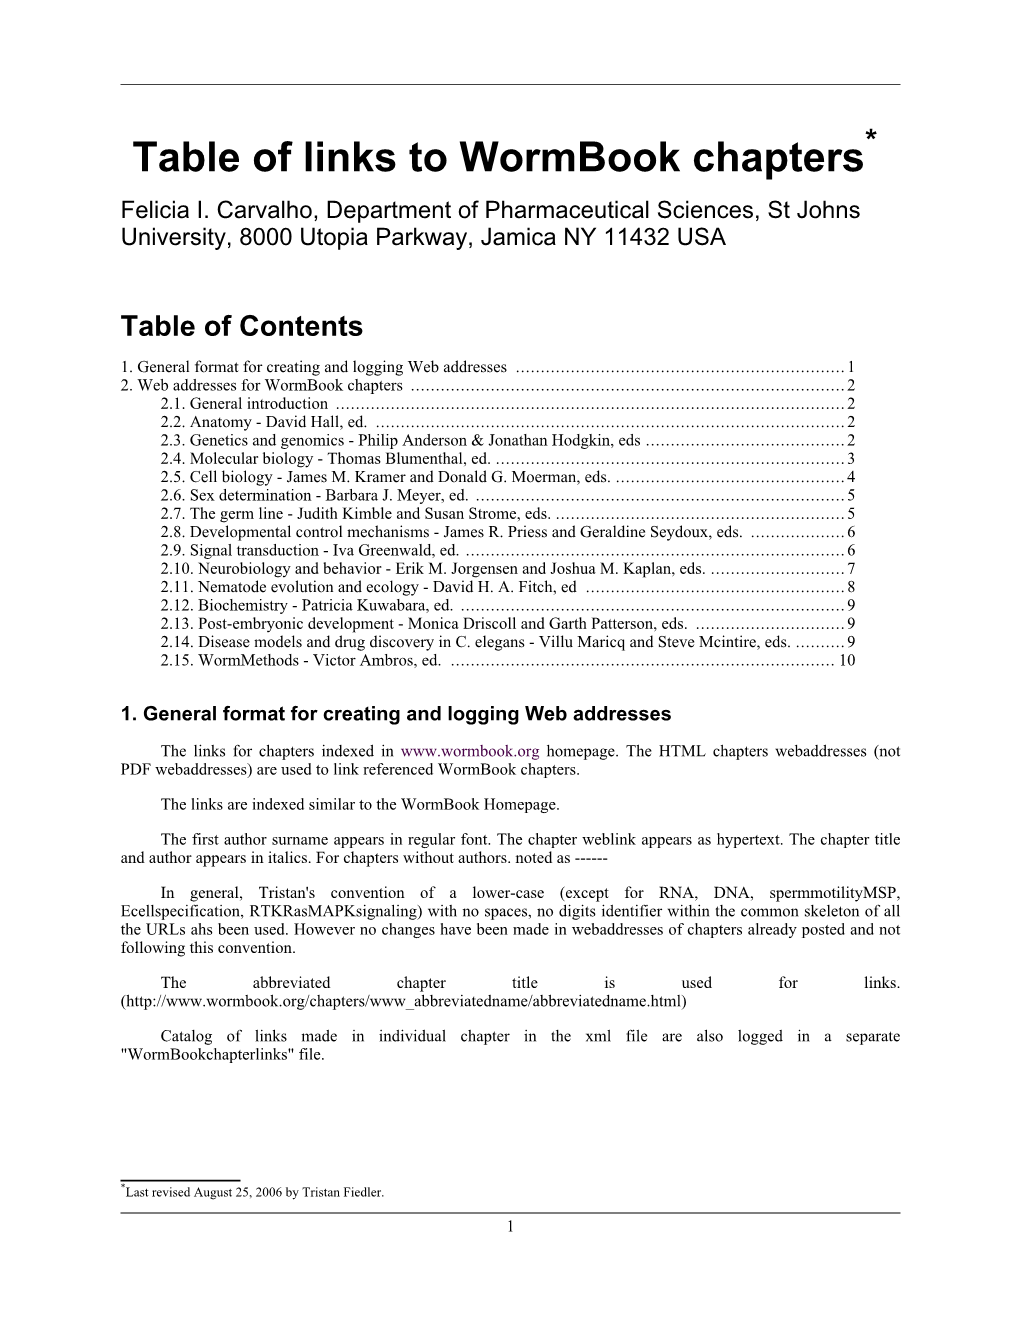 Table of Links to Wormbook Chapters* Felicia I